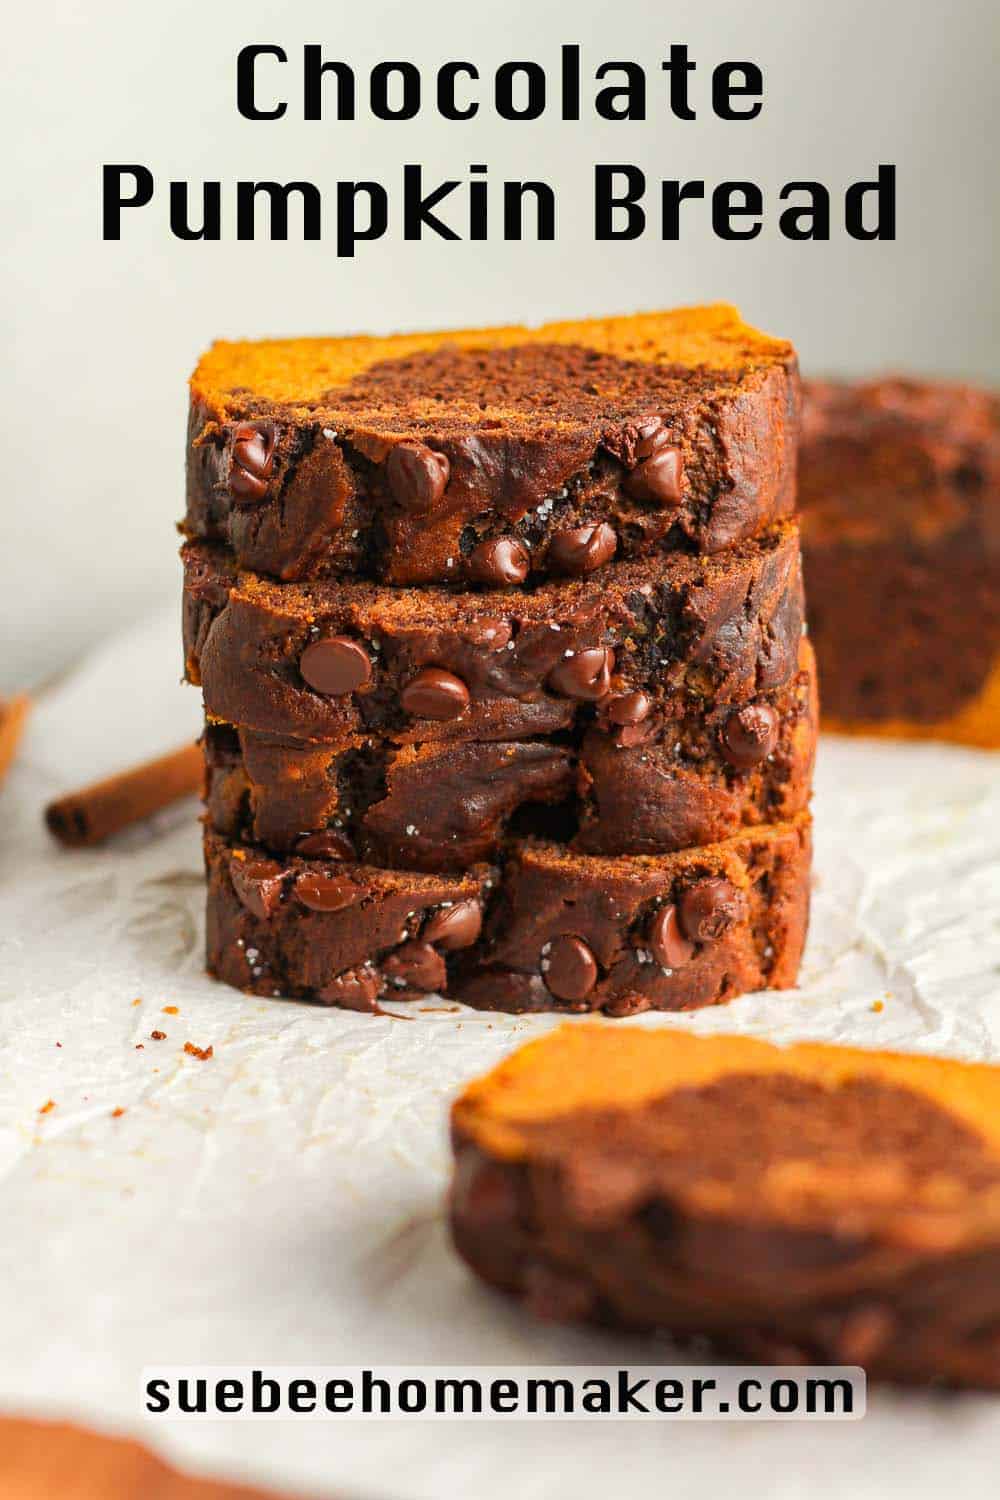 A stack of four slices of chocolate pumpkin bread.